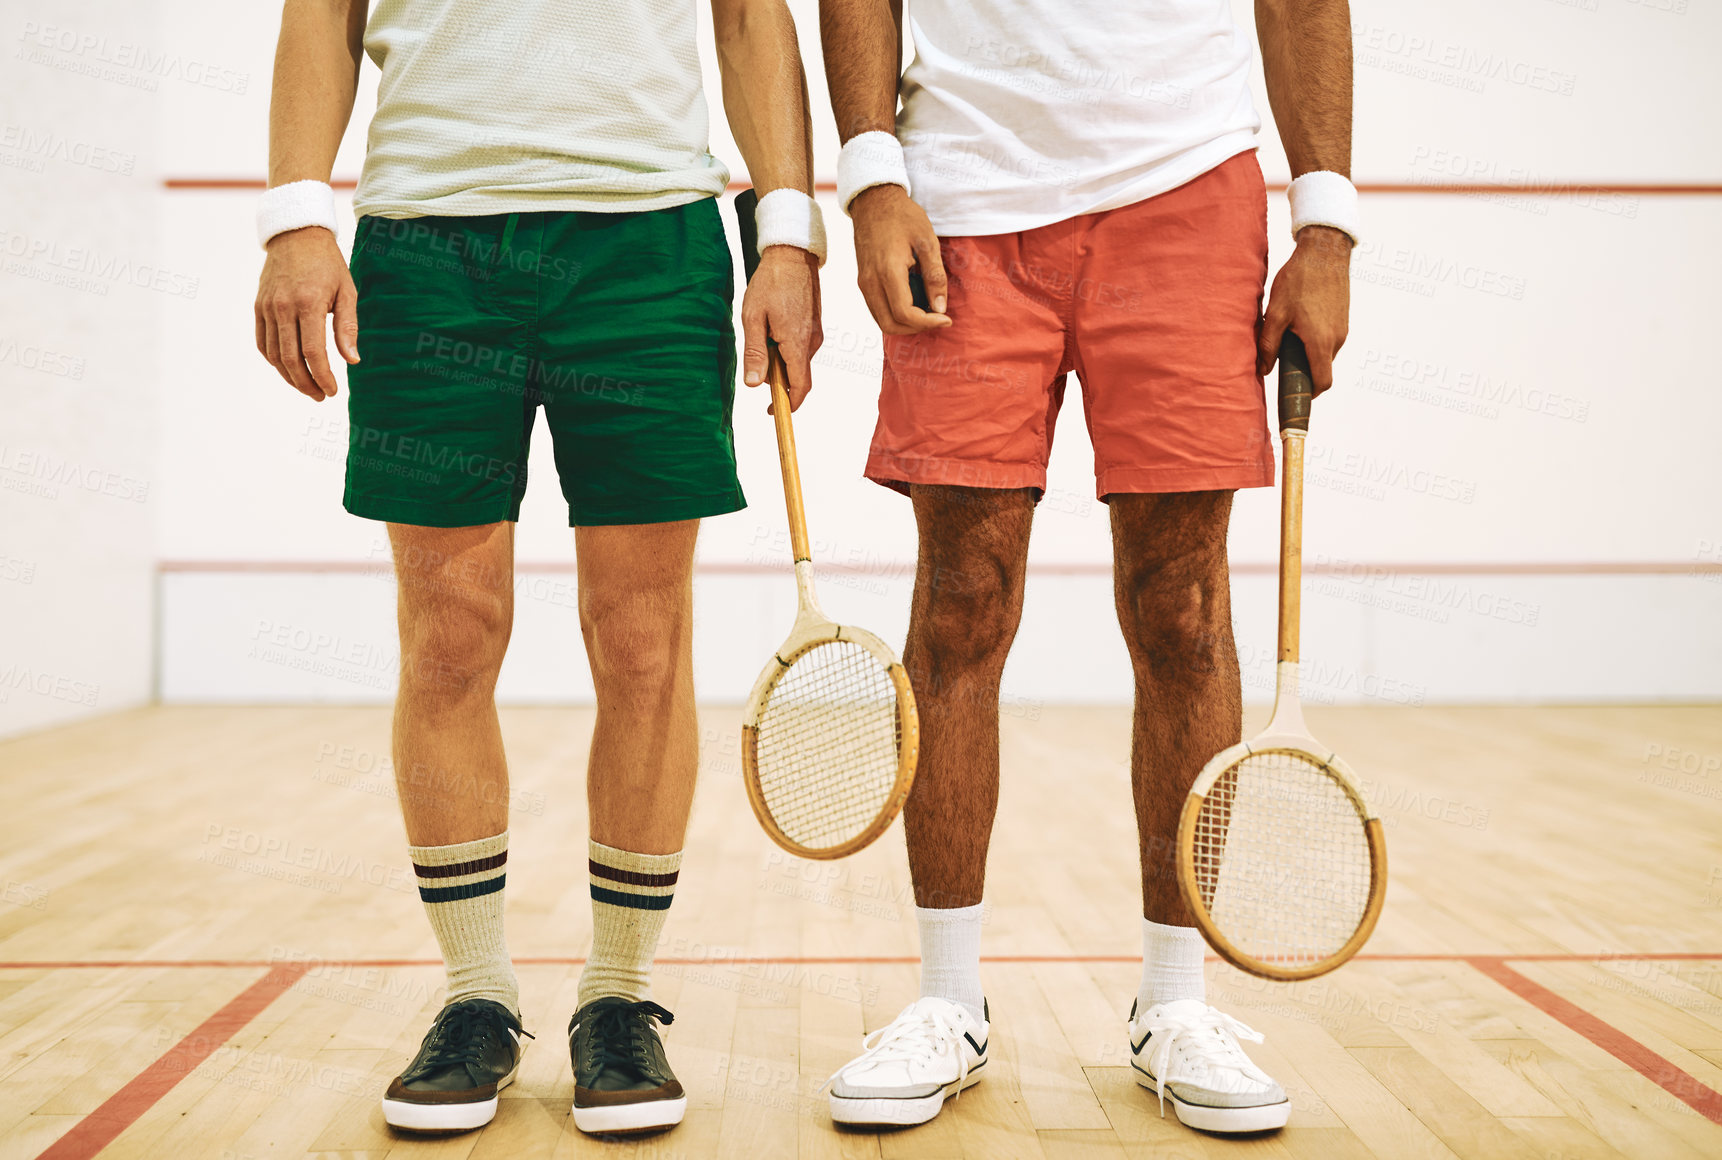 Buy stock photo Cropped shot of two men holding their racquets at a squash court